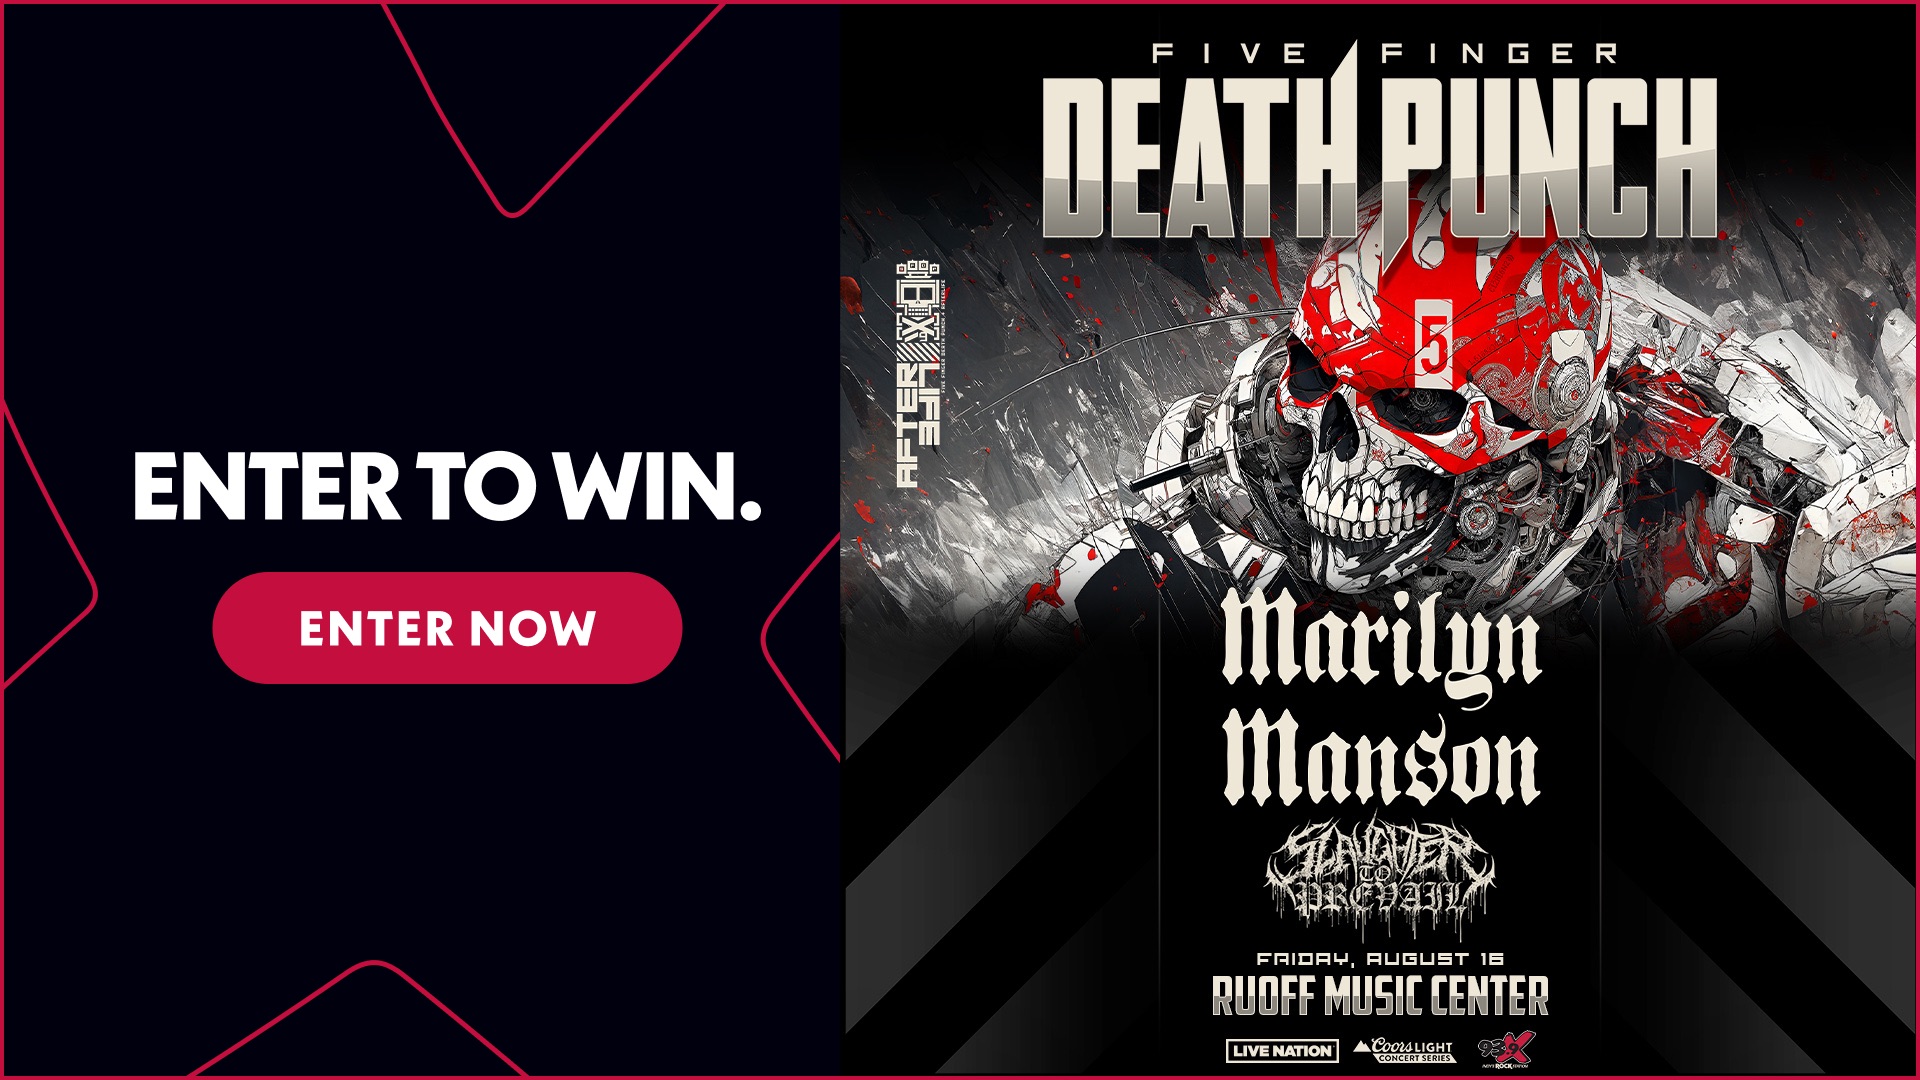 Enter To Win Five Finger Death Punch Tickets